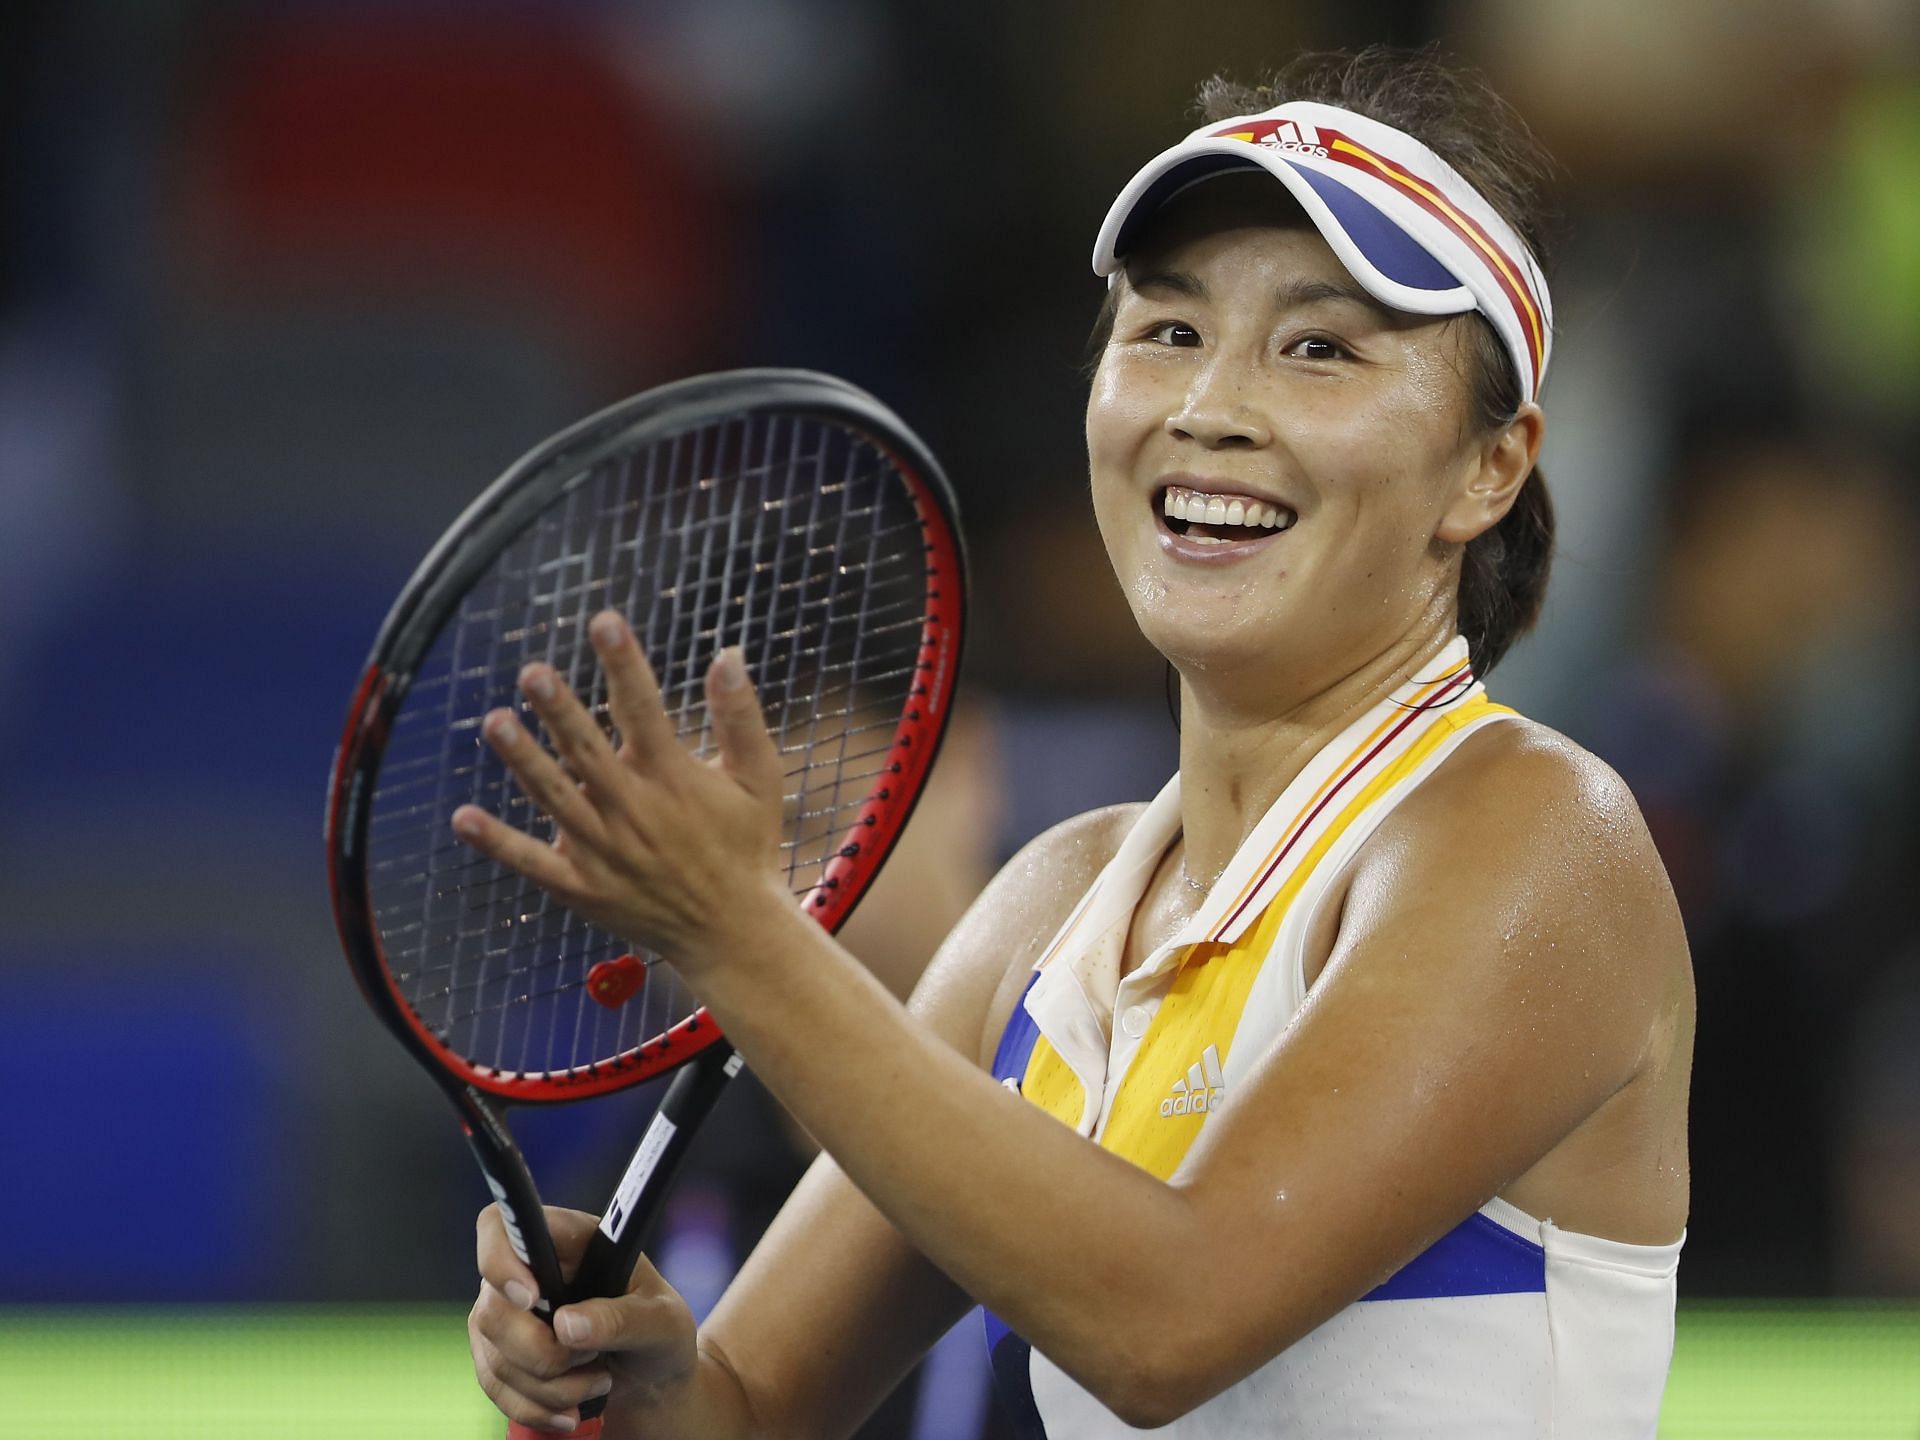 Peng Shuai has been facing censorhip in China since coming forward with the abuse alleagtions.